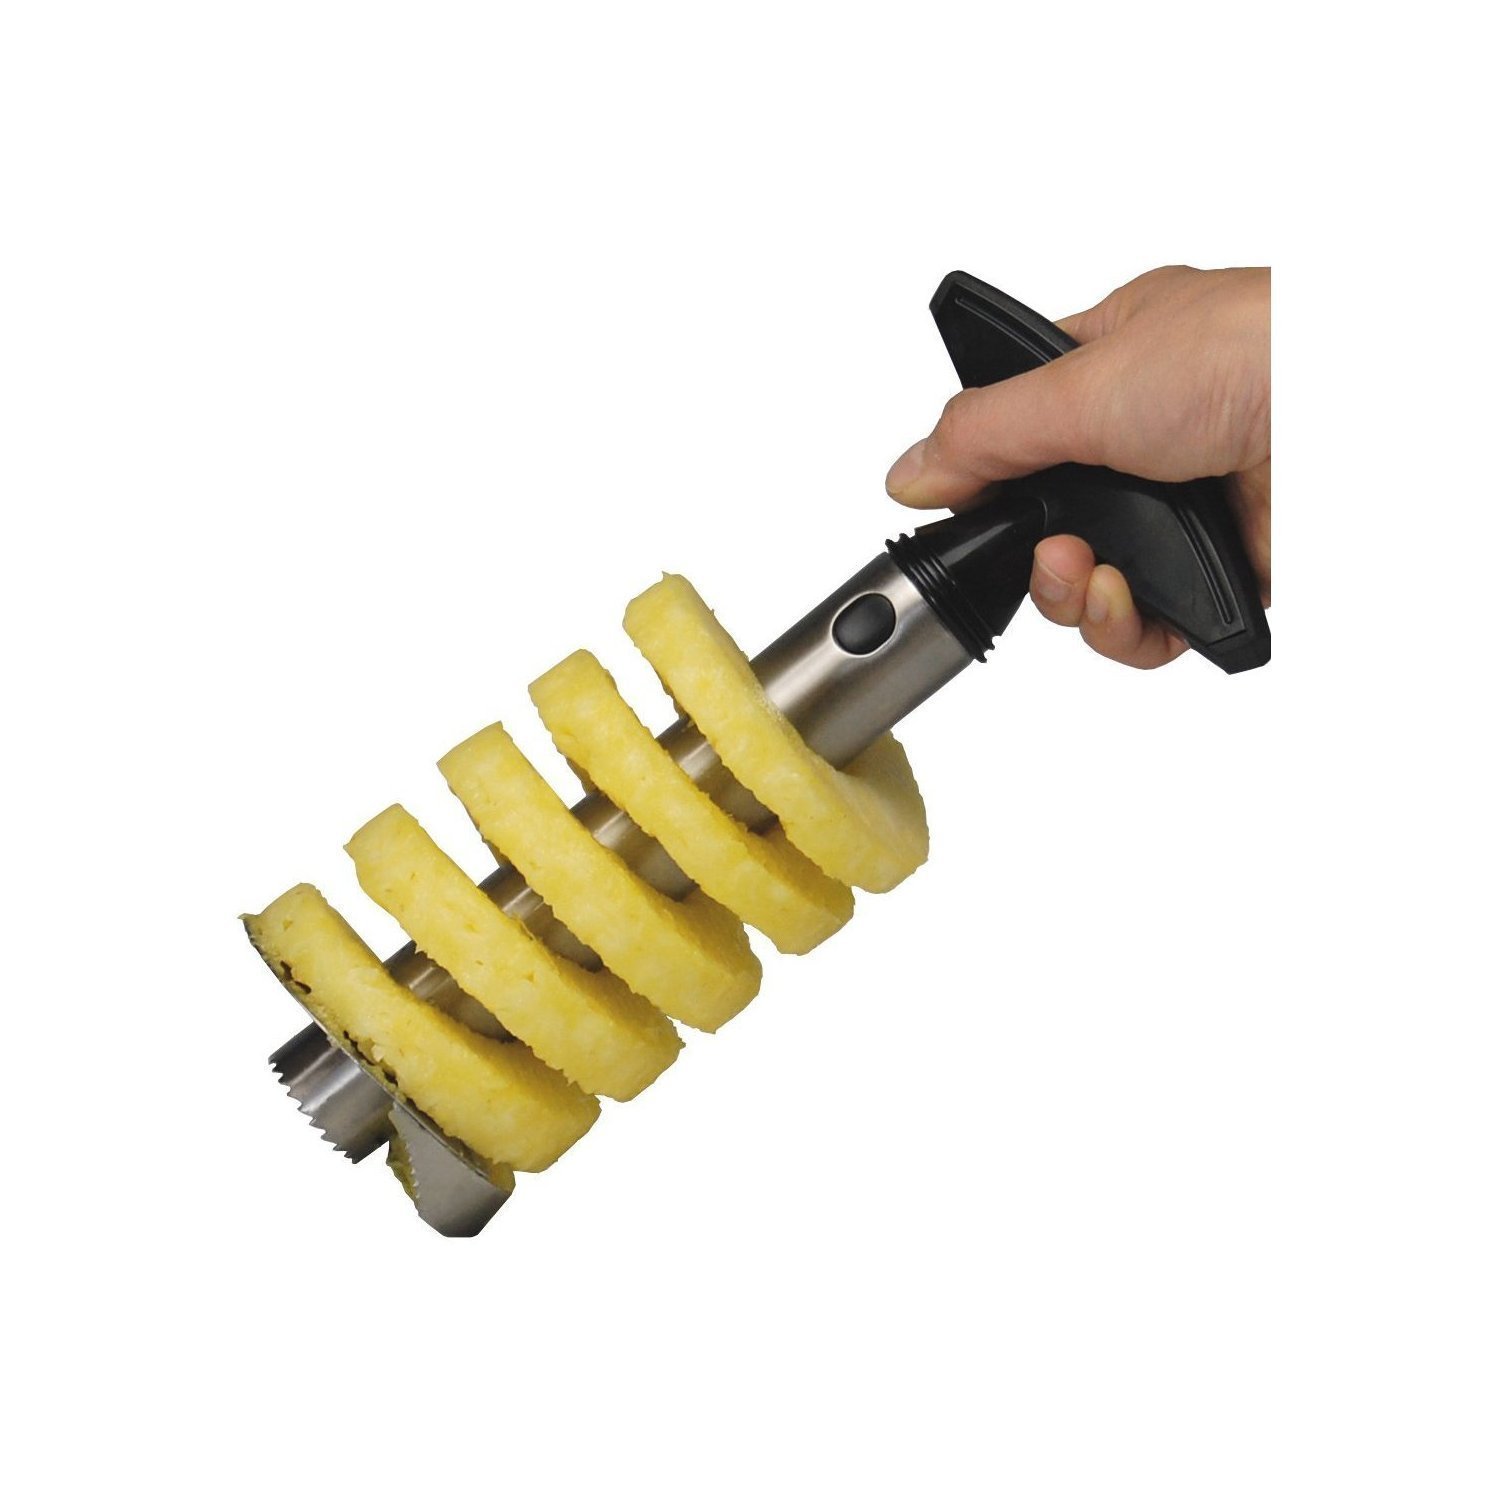  Click to open expanded view New Pineapple Peeler, Corer & Slicer - Stainless Steel